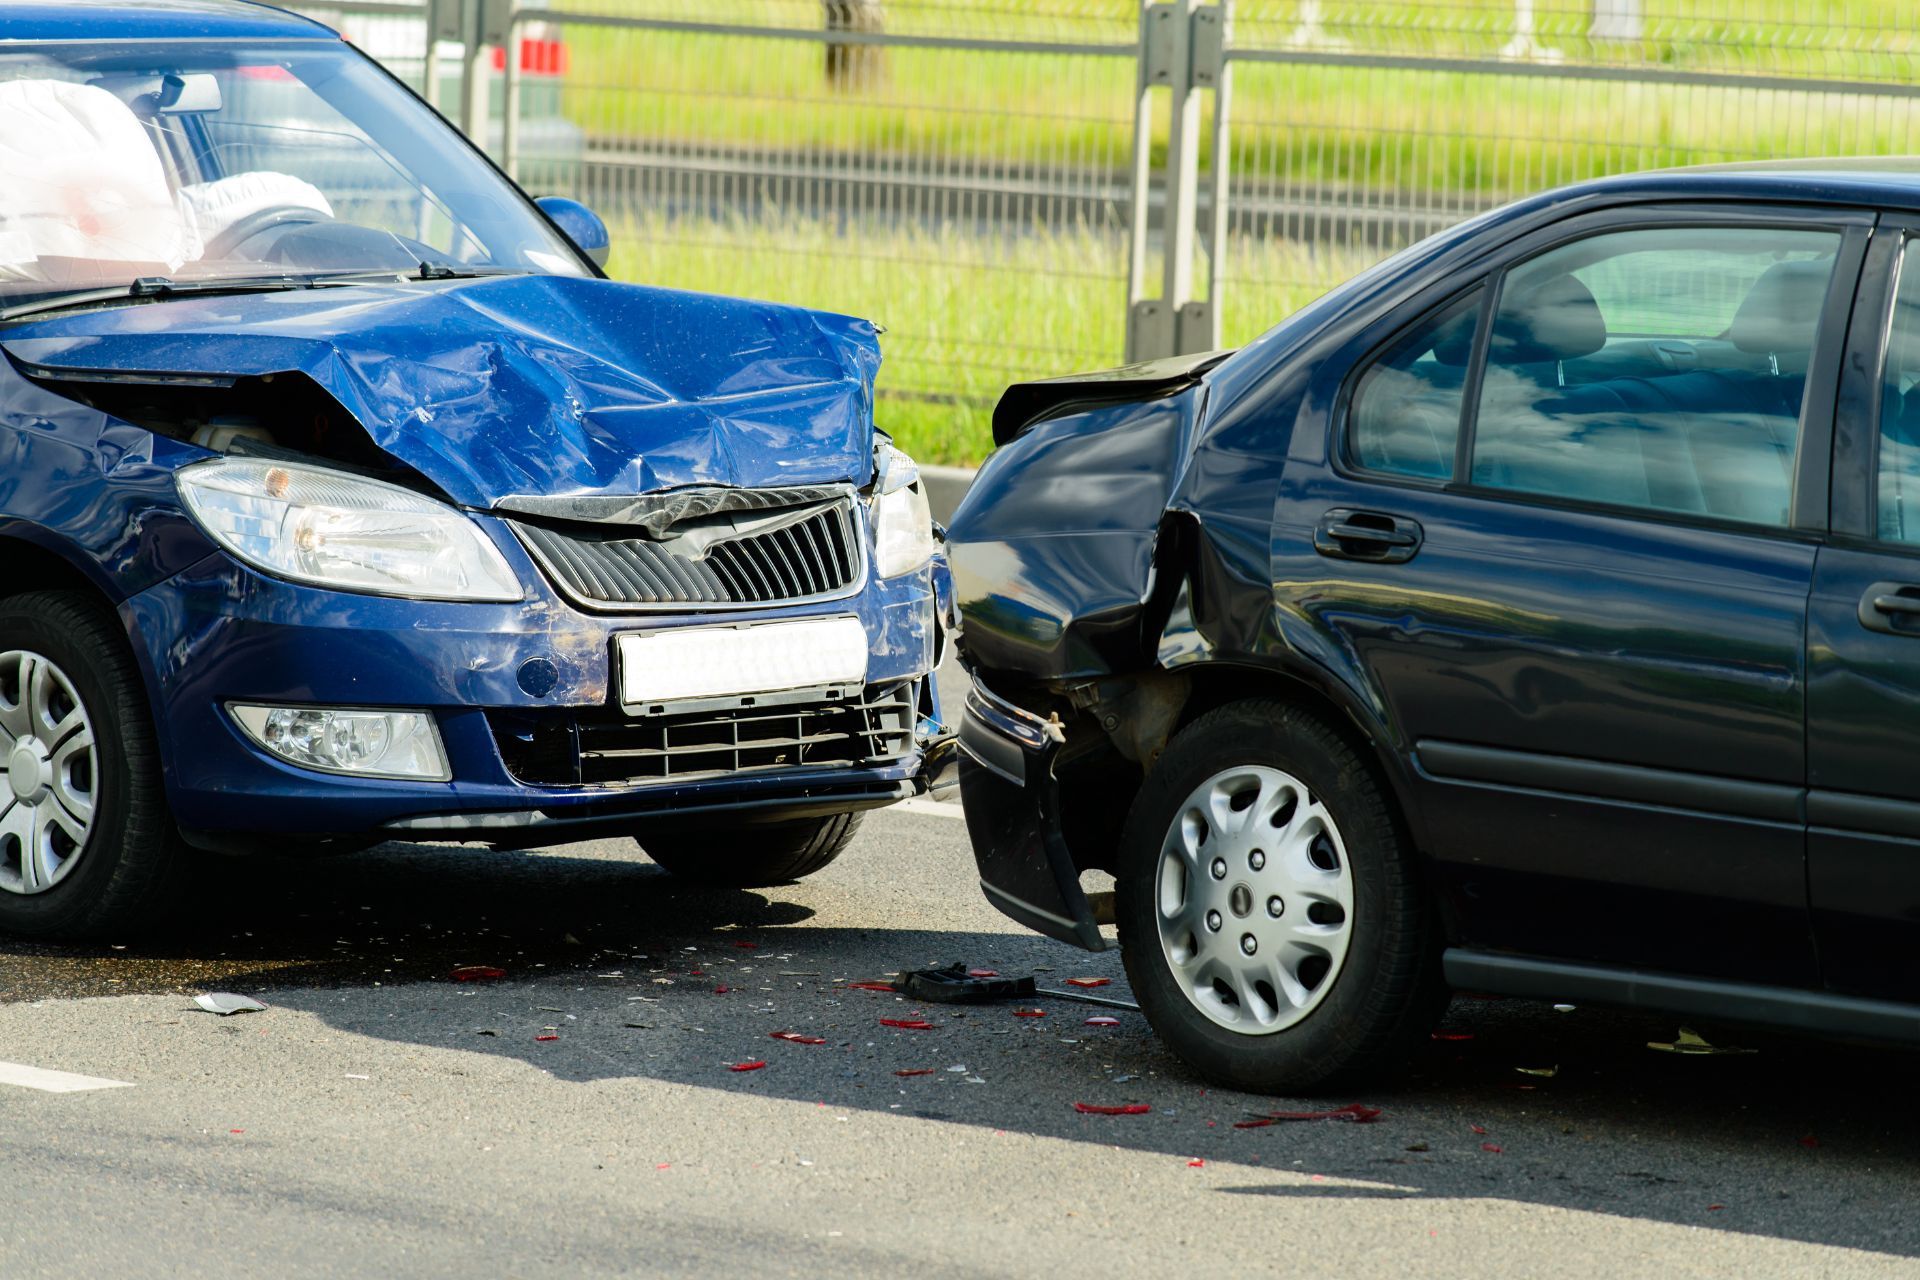 5 Common Causes of Auto Accidents and How To Avoid Them